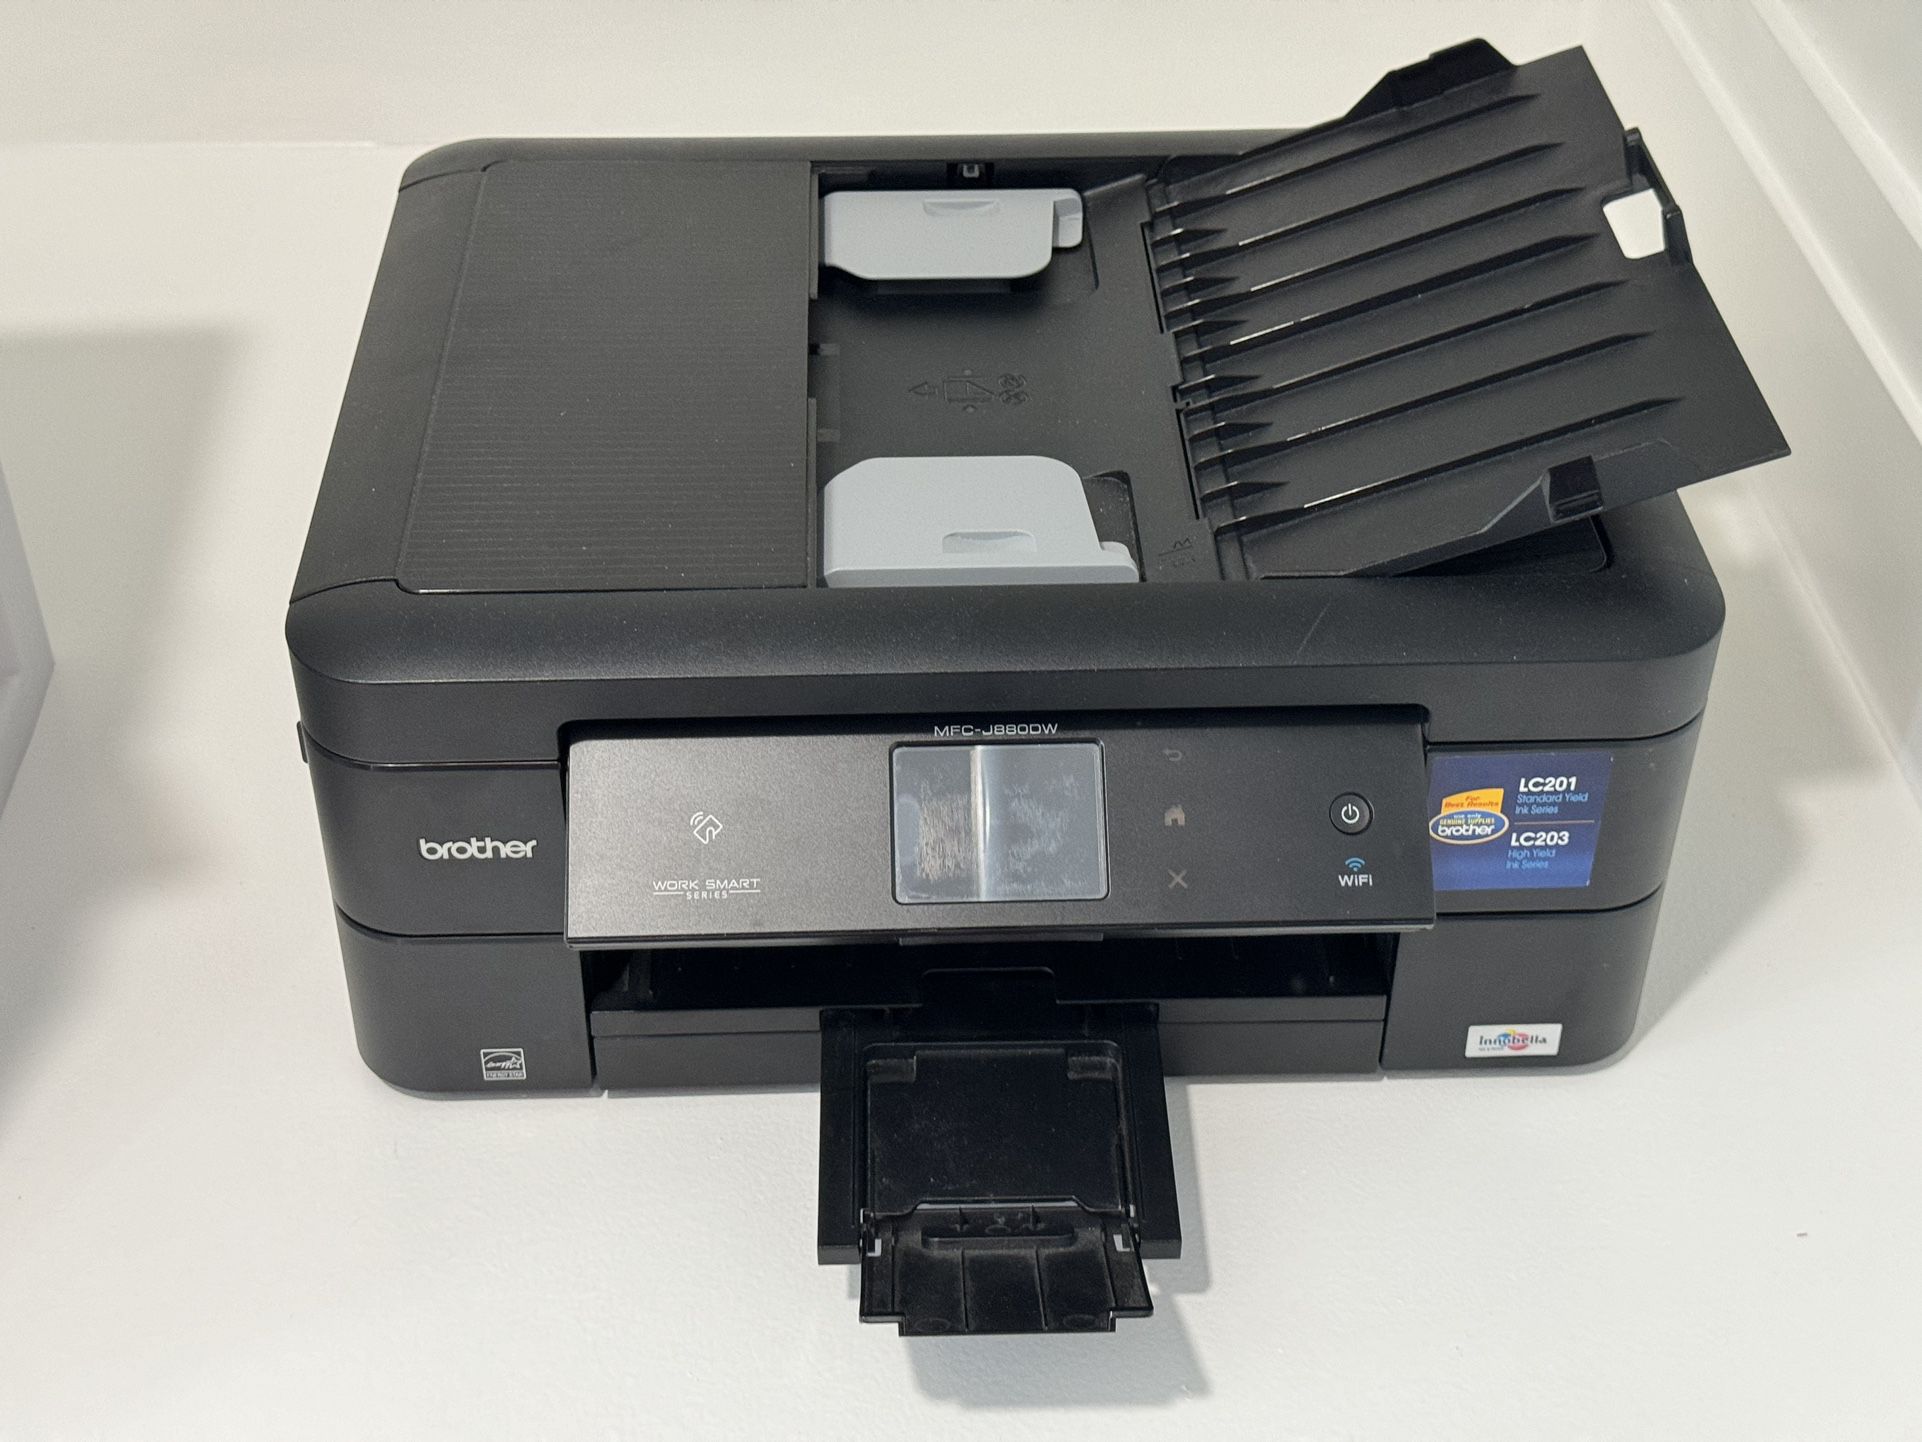 Brother MFC-J880DW Printer With ink